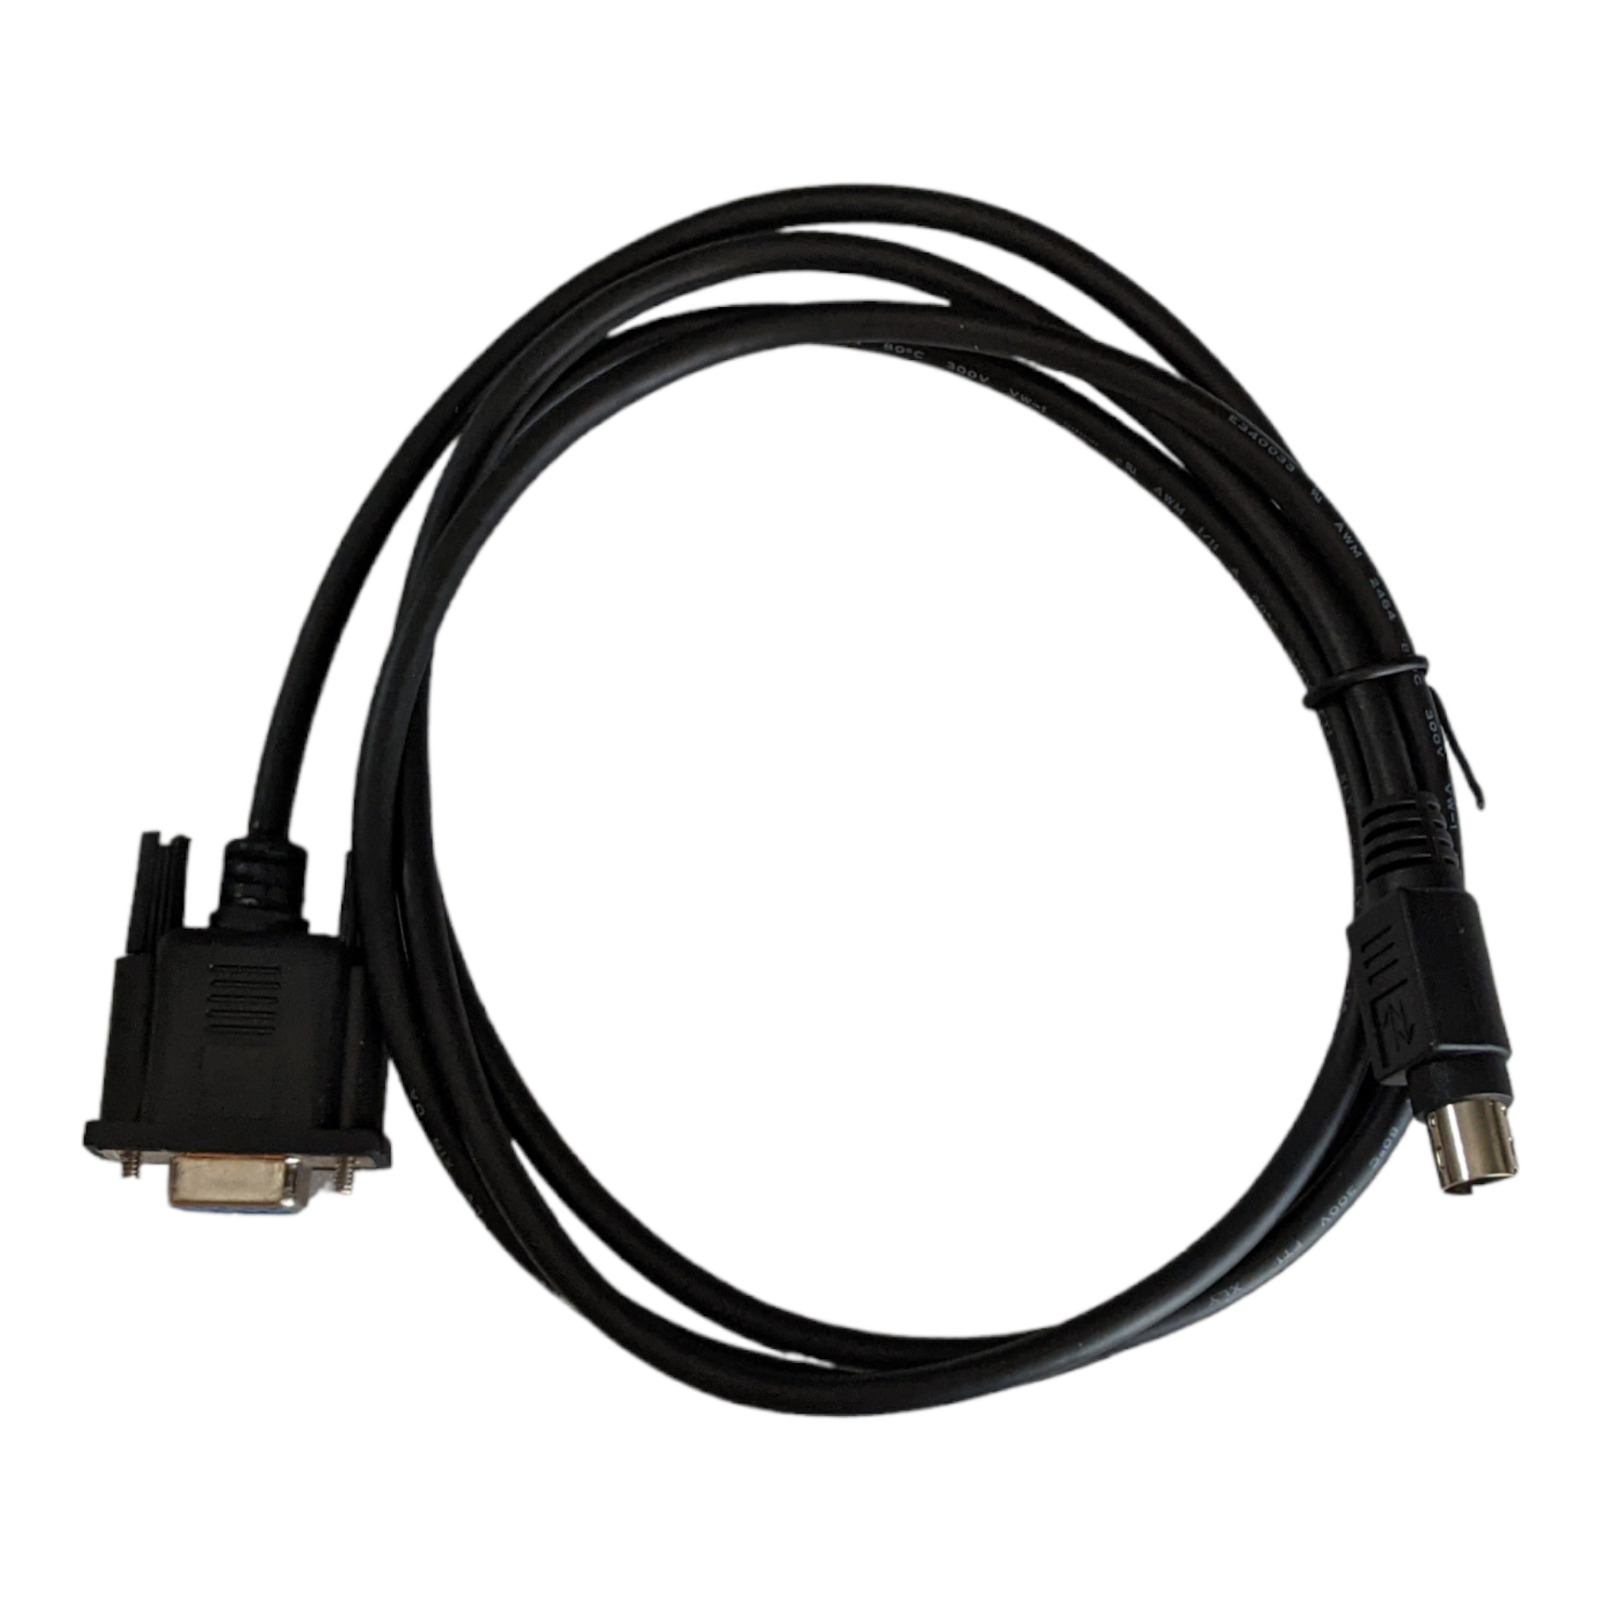 For Dell Password Reset/Service Cable MN657 MD1200 MD1220 MD3200 MD3200i 3M